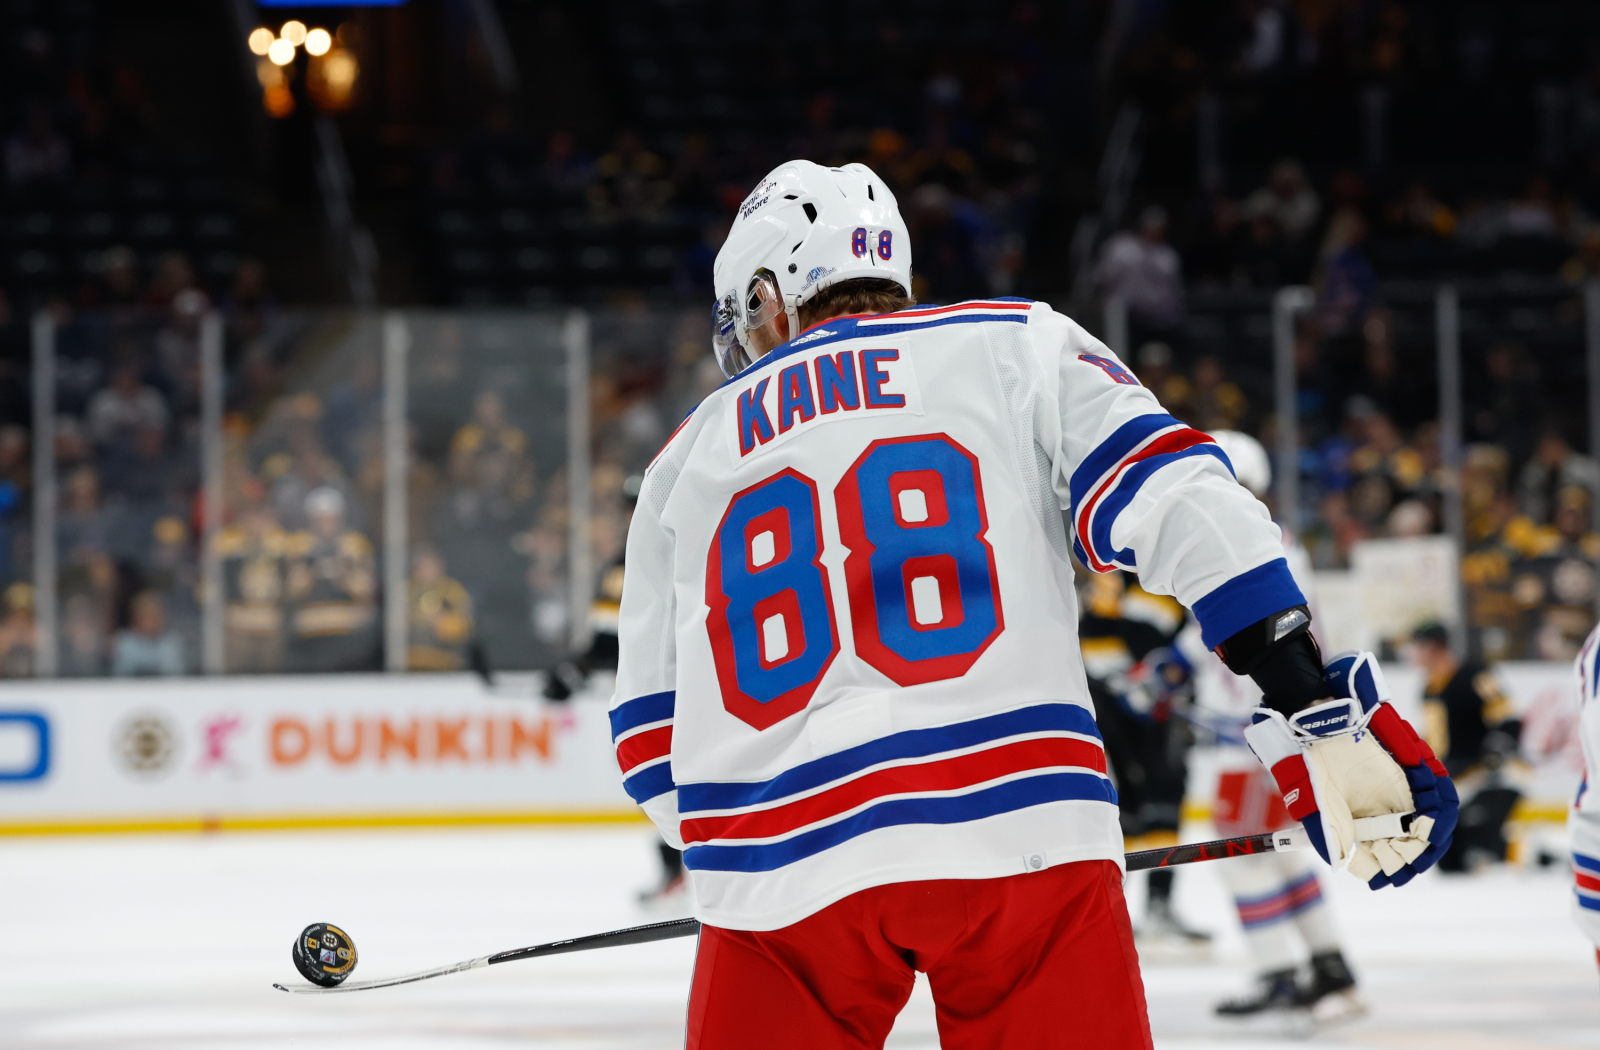 Patrick Kane New York Rangers jersey is available now on Fanatics